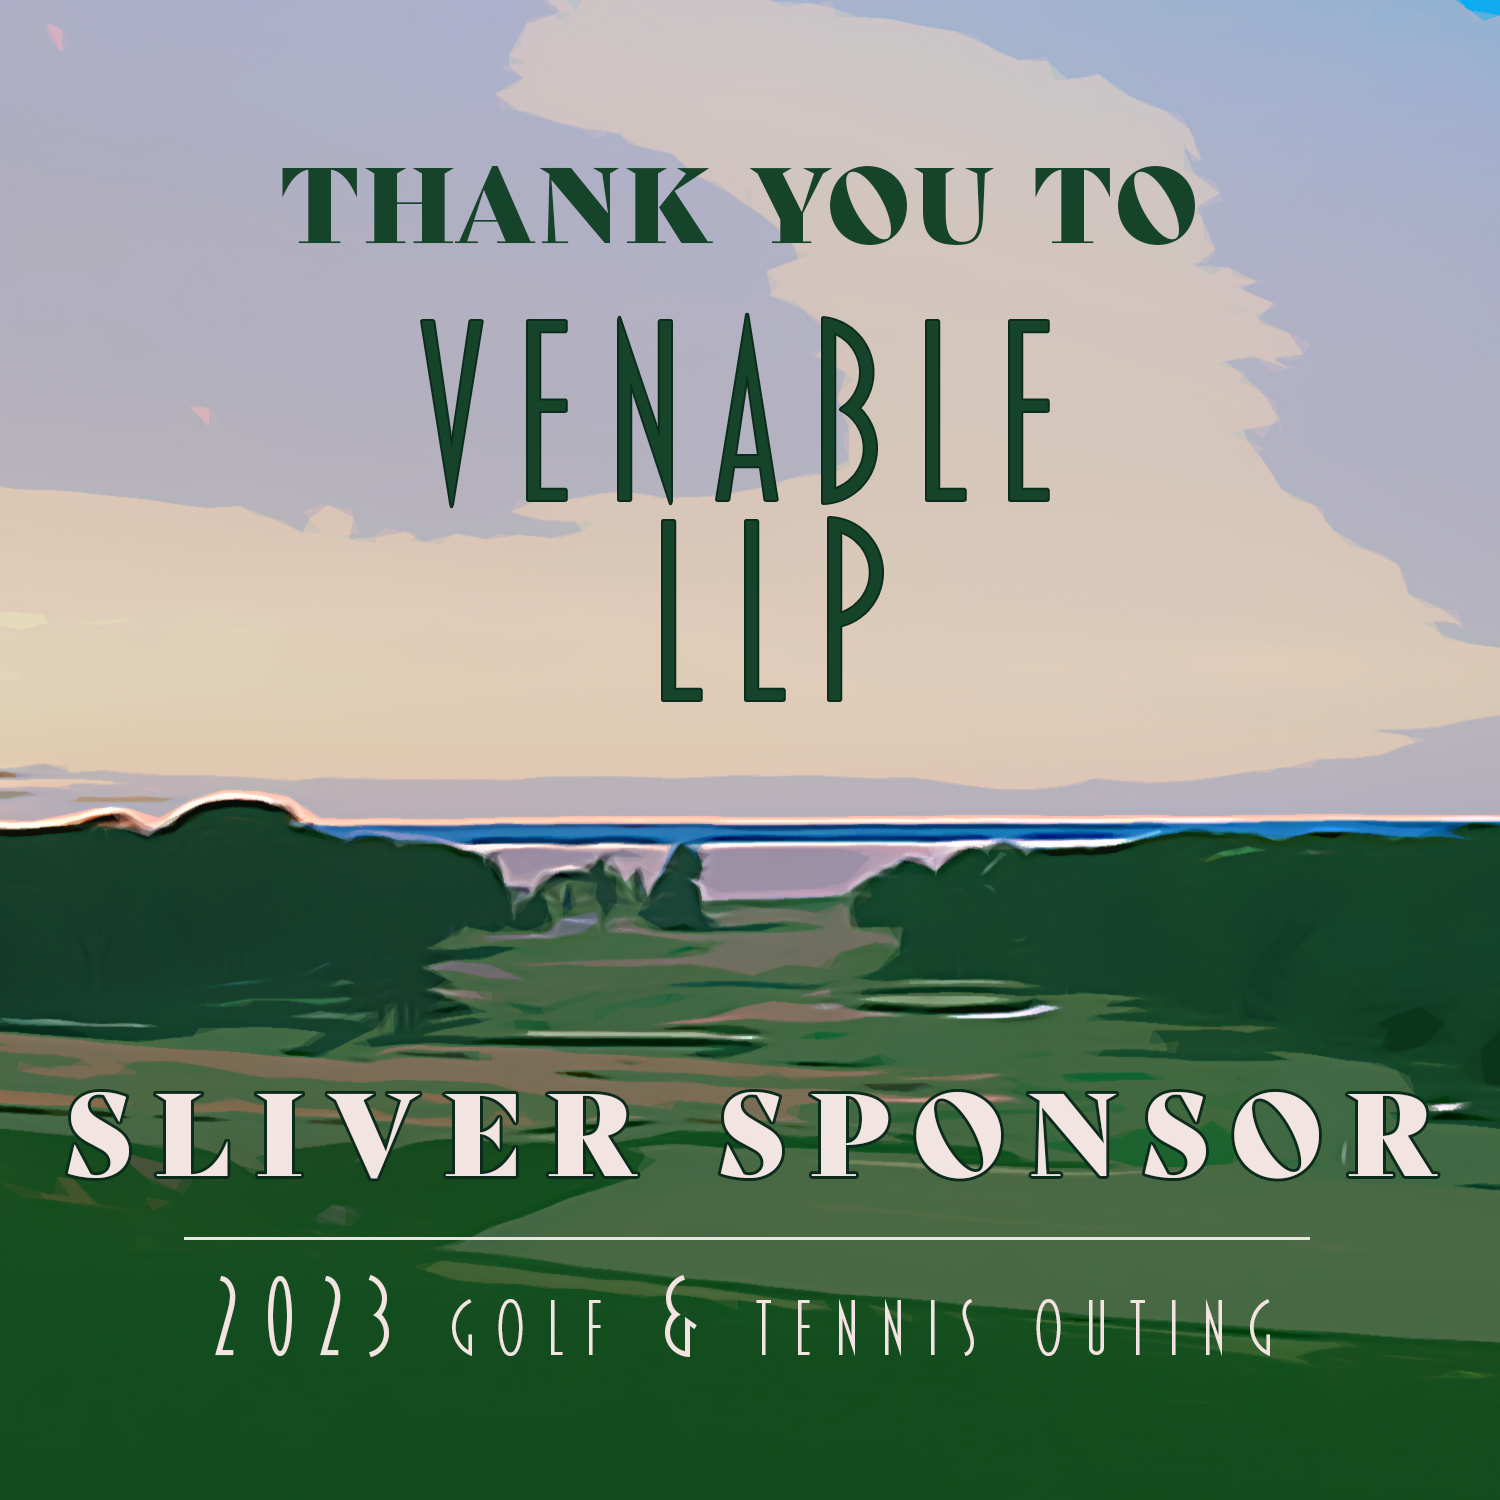 TY Venable LLP.png